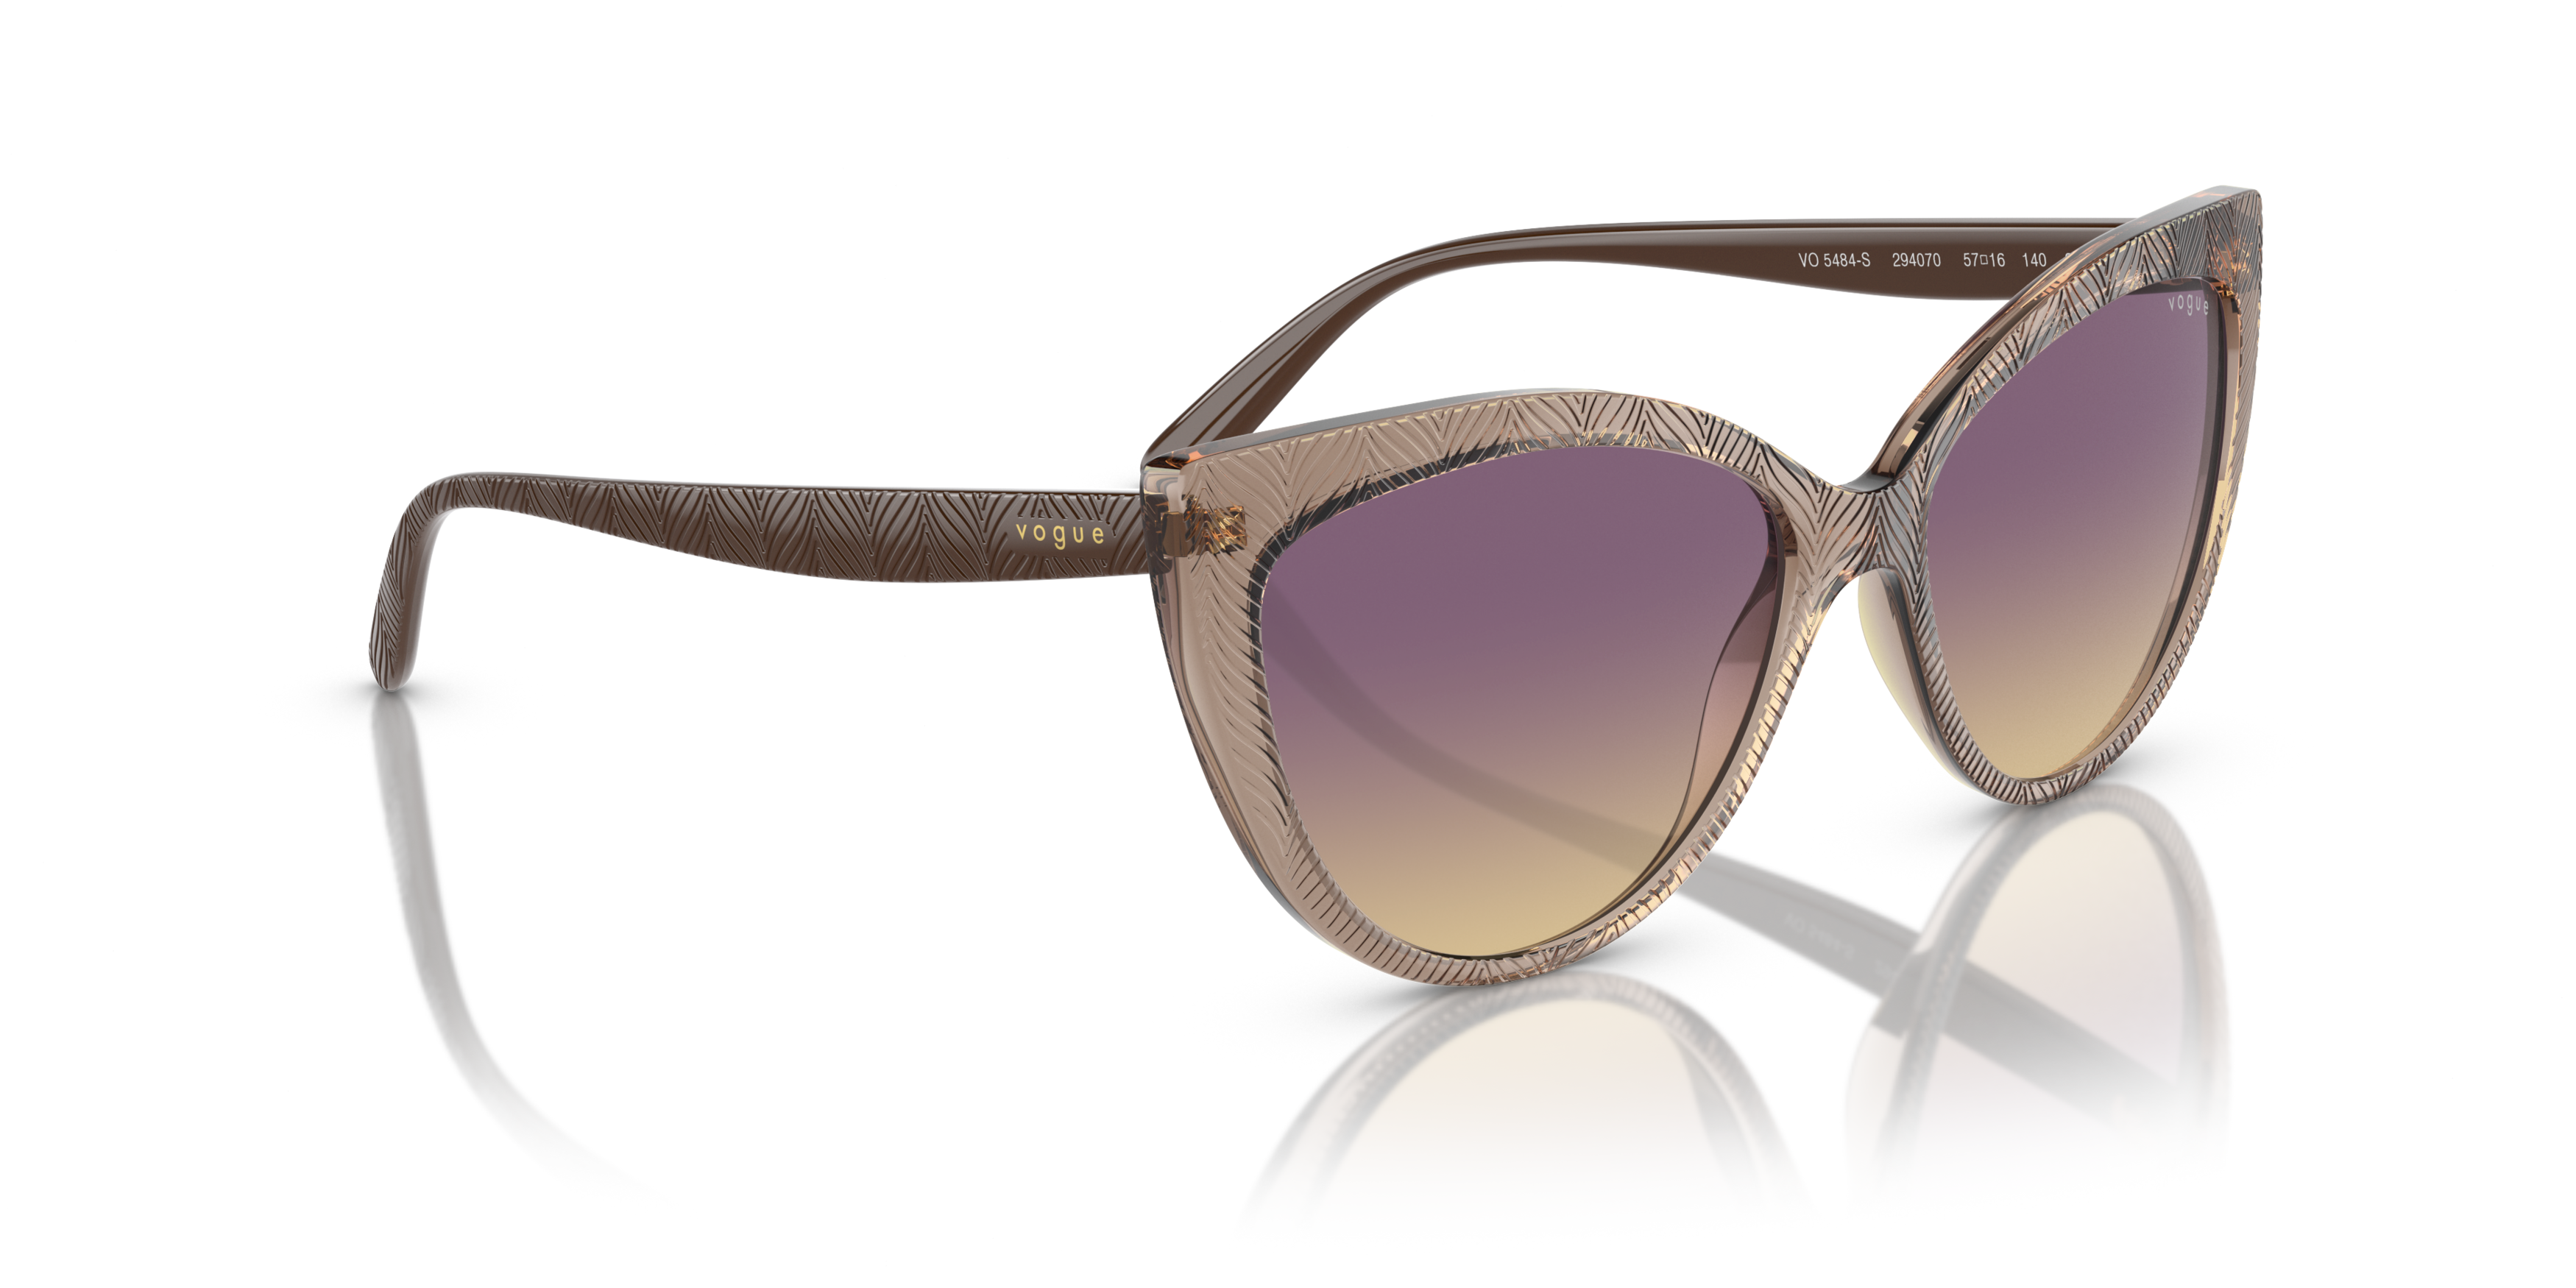 Angle_Right01 Vogue VO 5484S (294070) Sunglasses Violet / Brown